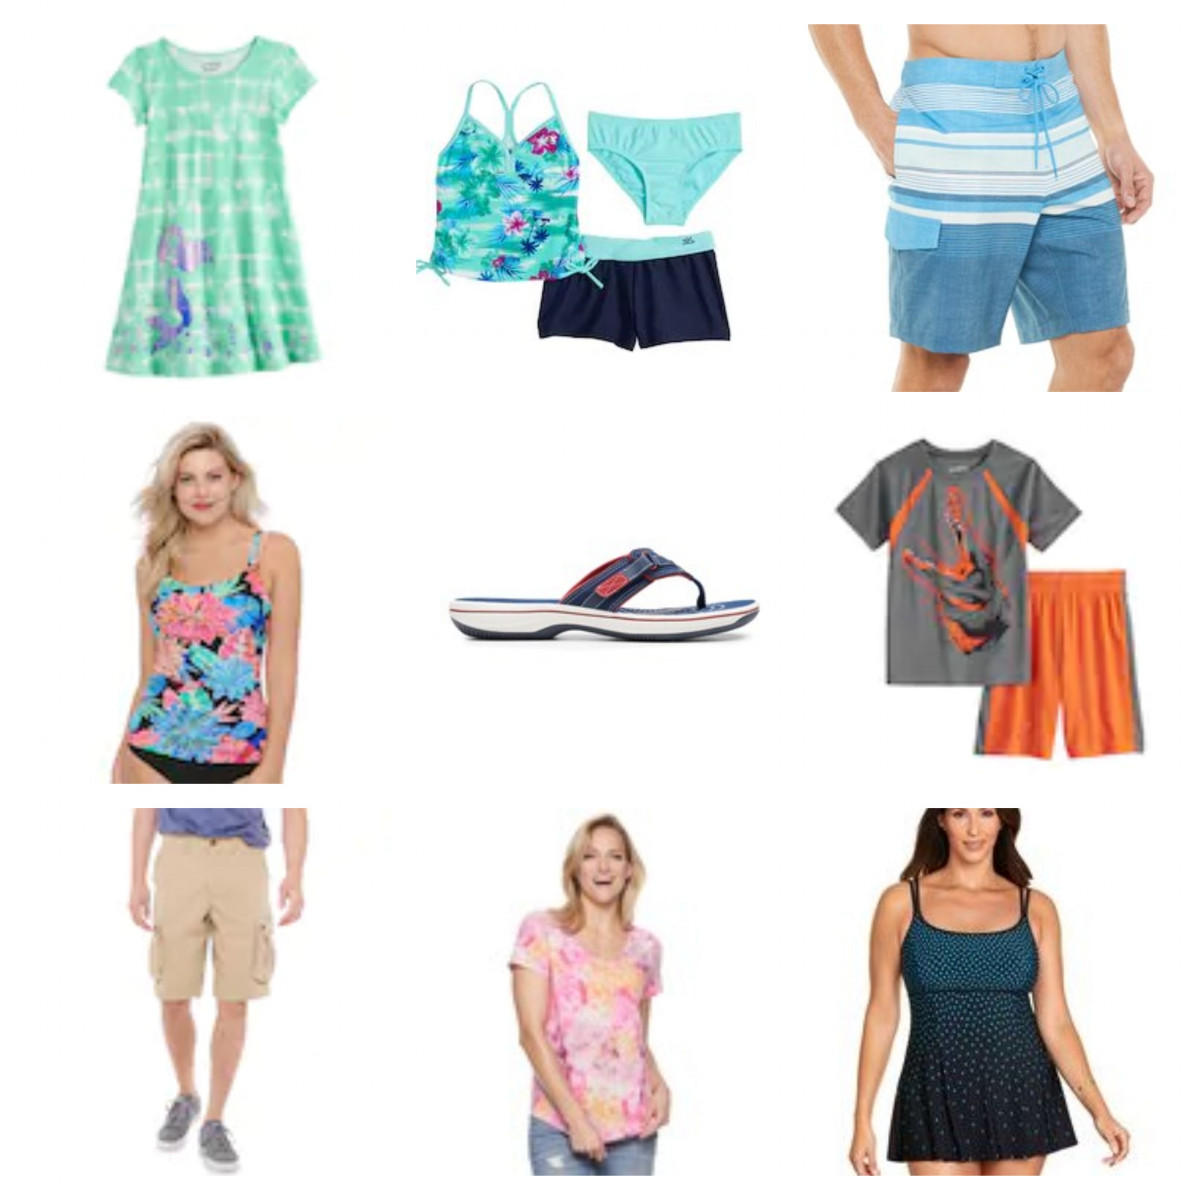 Alea's Deals Kohl’s: 25% off Summer Items + Extra 20% off (Today Only)  